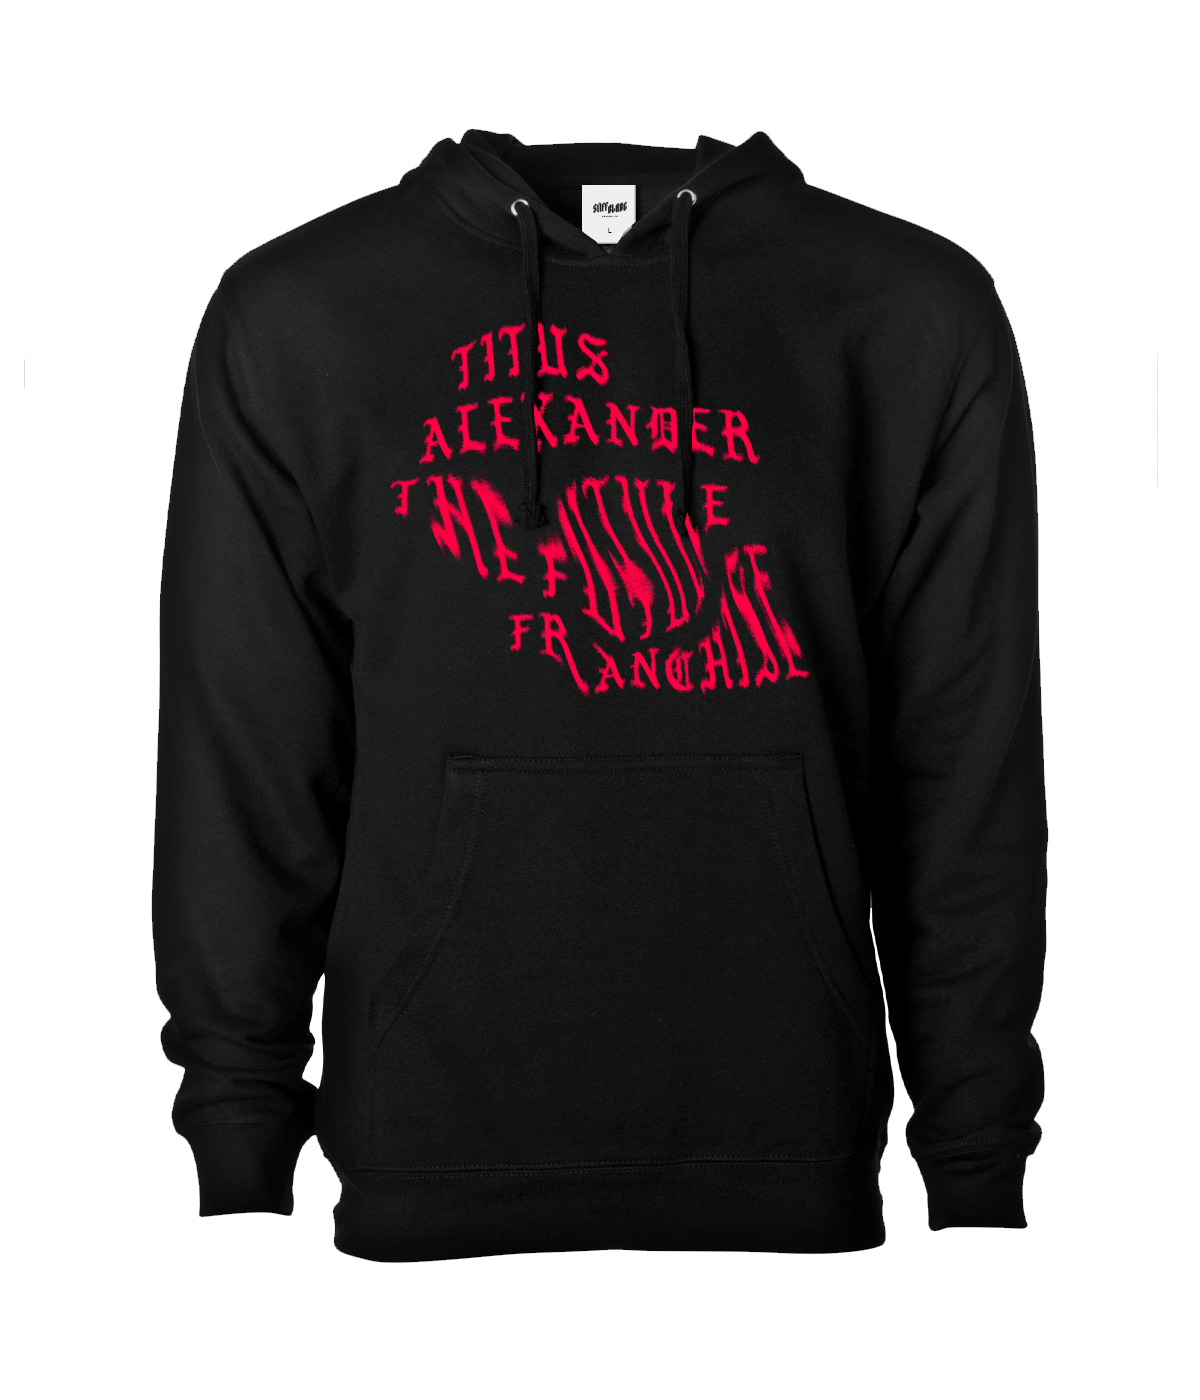 Titus Alexander - The Future Franchise Hoodie